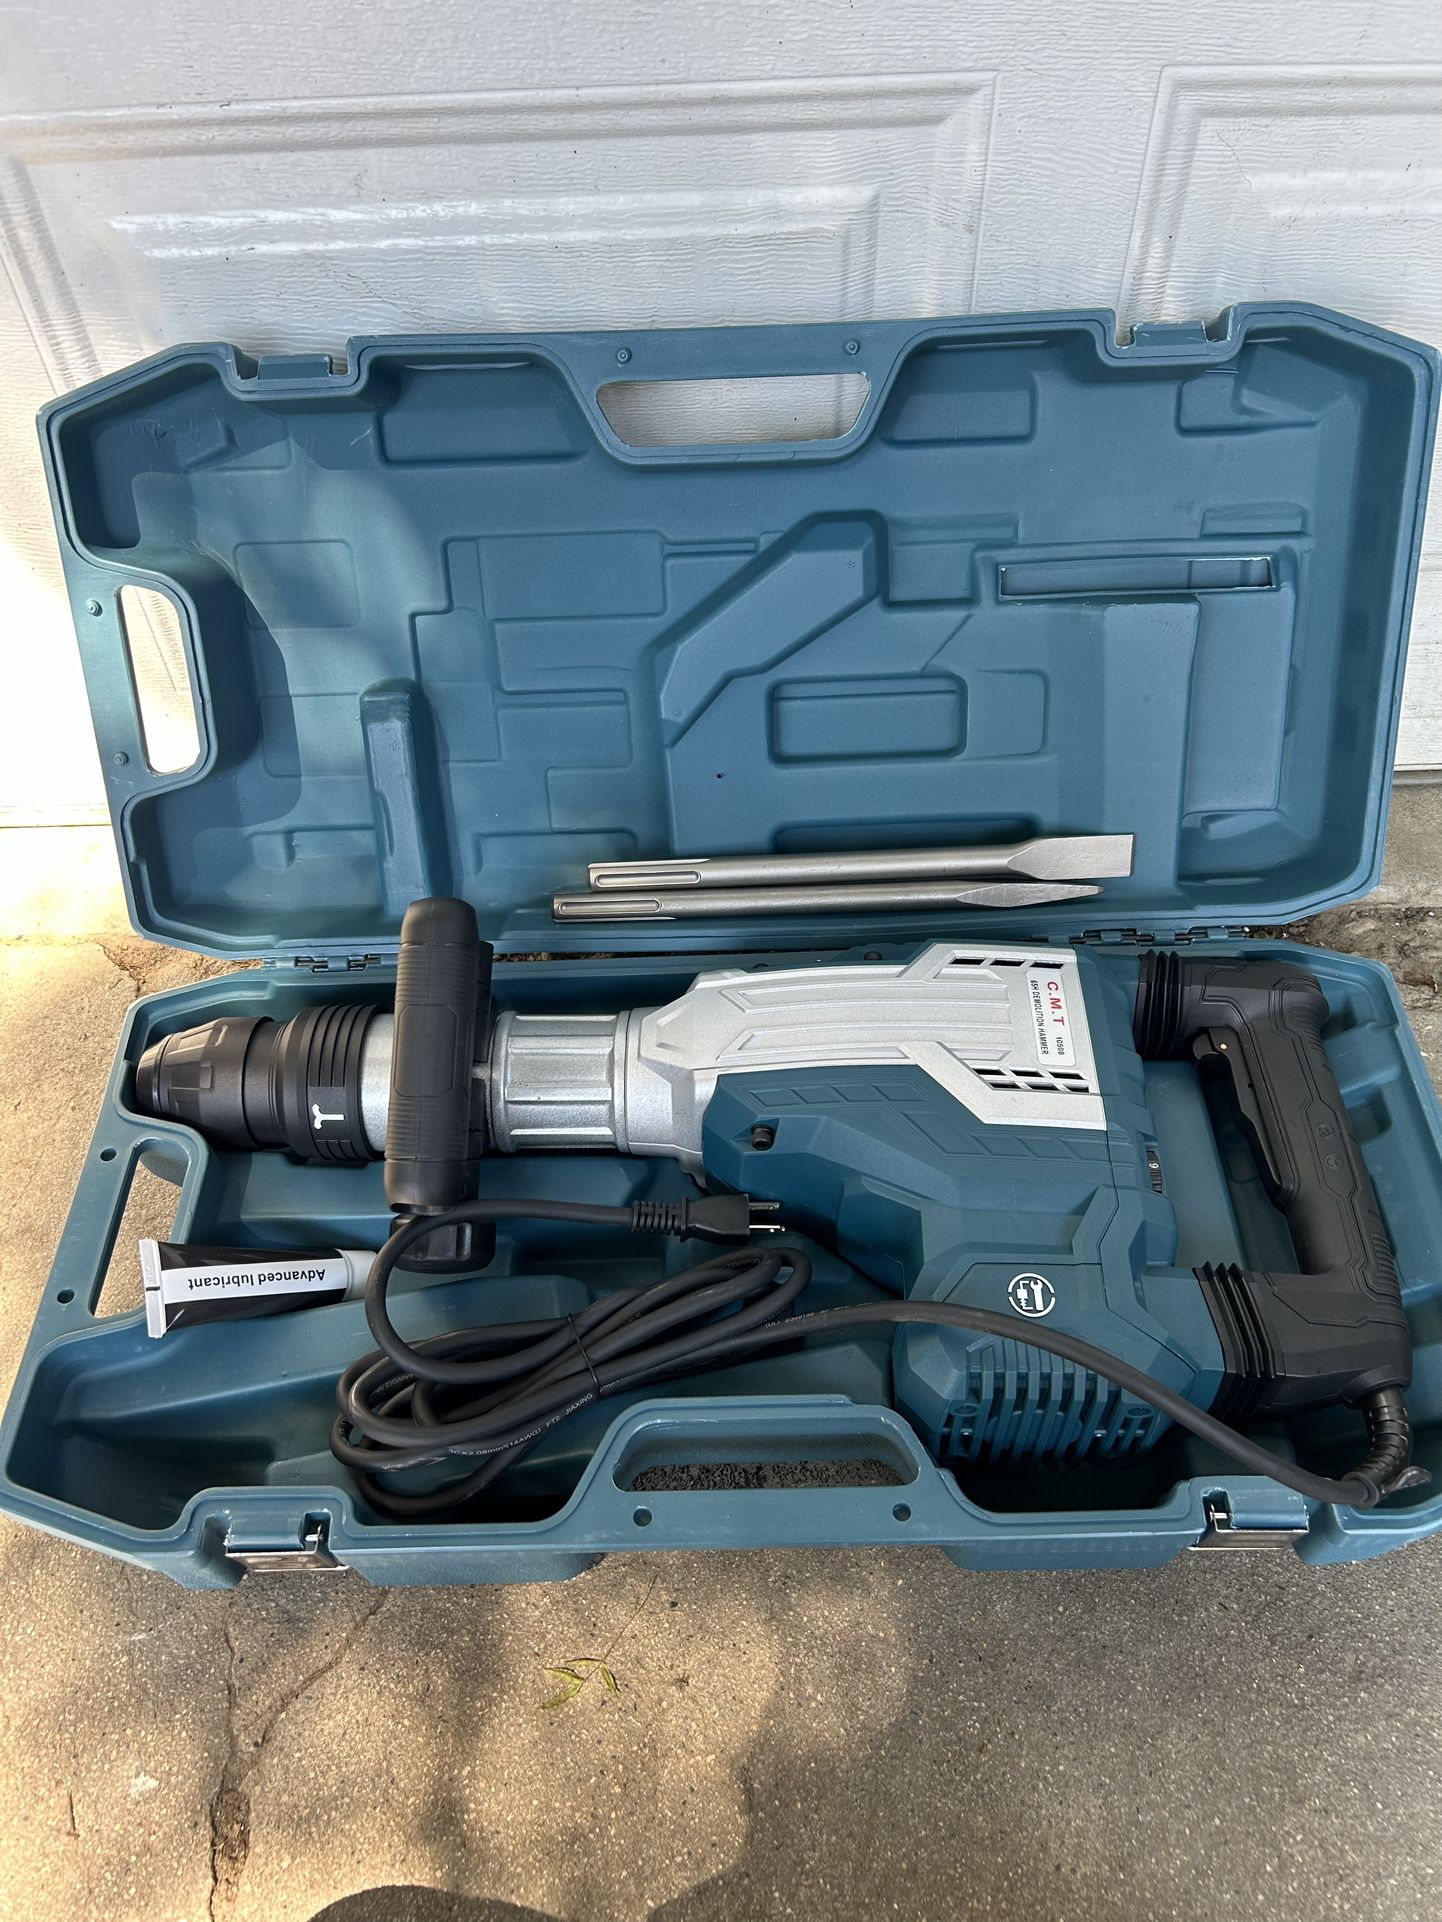 High quality electric demolition hammer  🔥🔥‼️‼️Brand new in box 📦 1 month warranty 